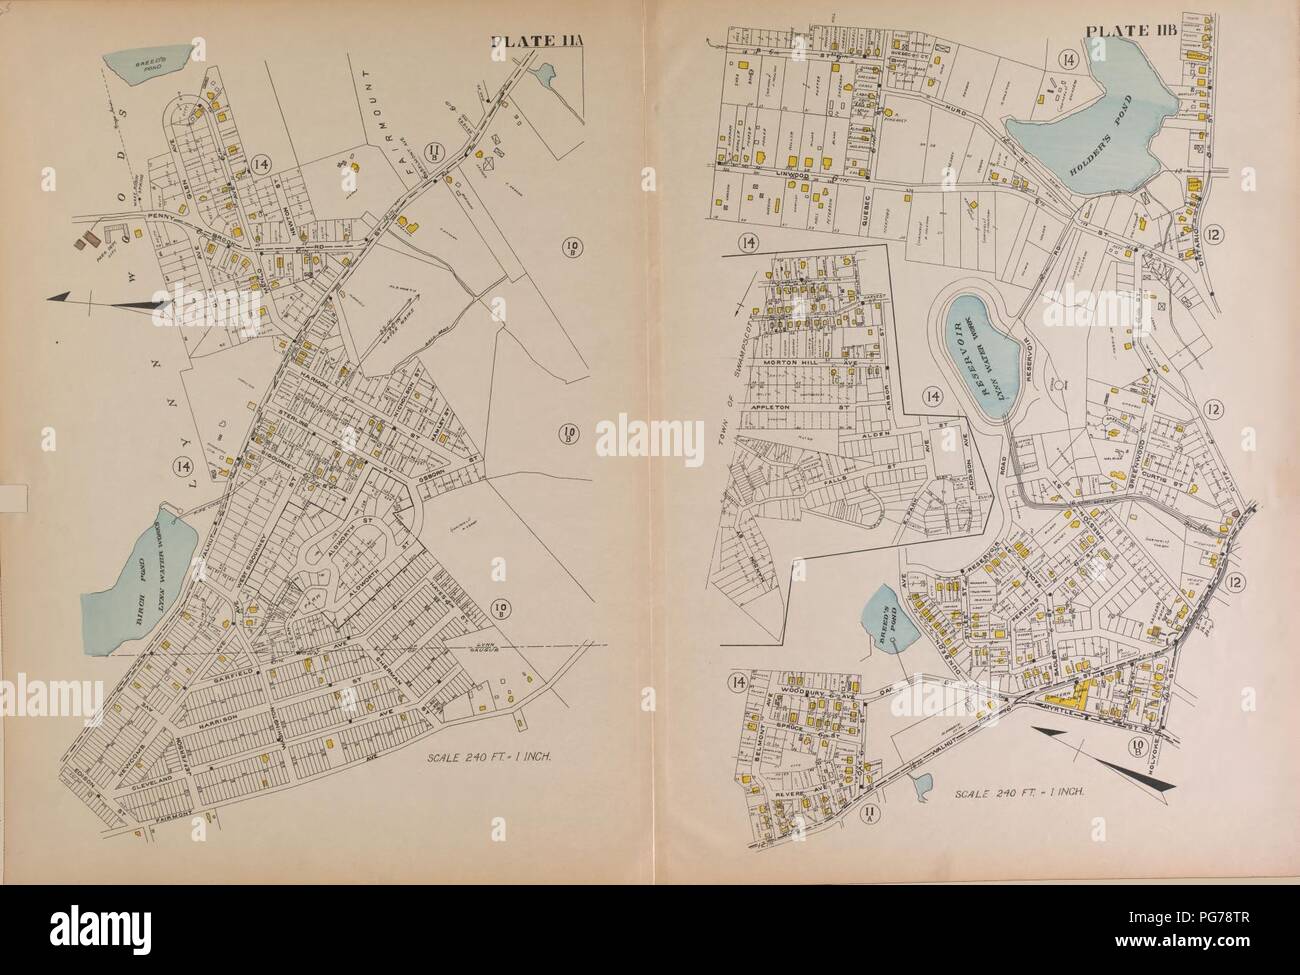 Atlas of the city of Lynn, Massachusetts - including also the towns of Swampscott and Saugus - based upon, and carefully compiled from, the best obtainable public and private sources, together with Stock Photo